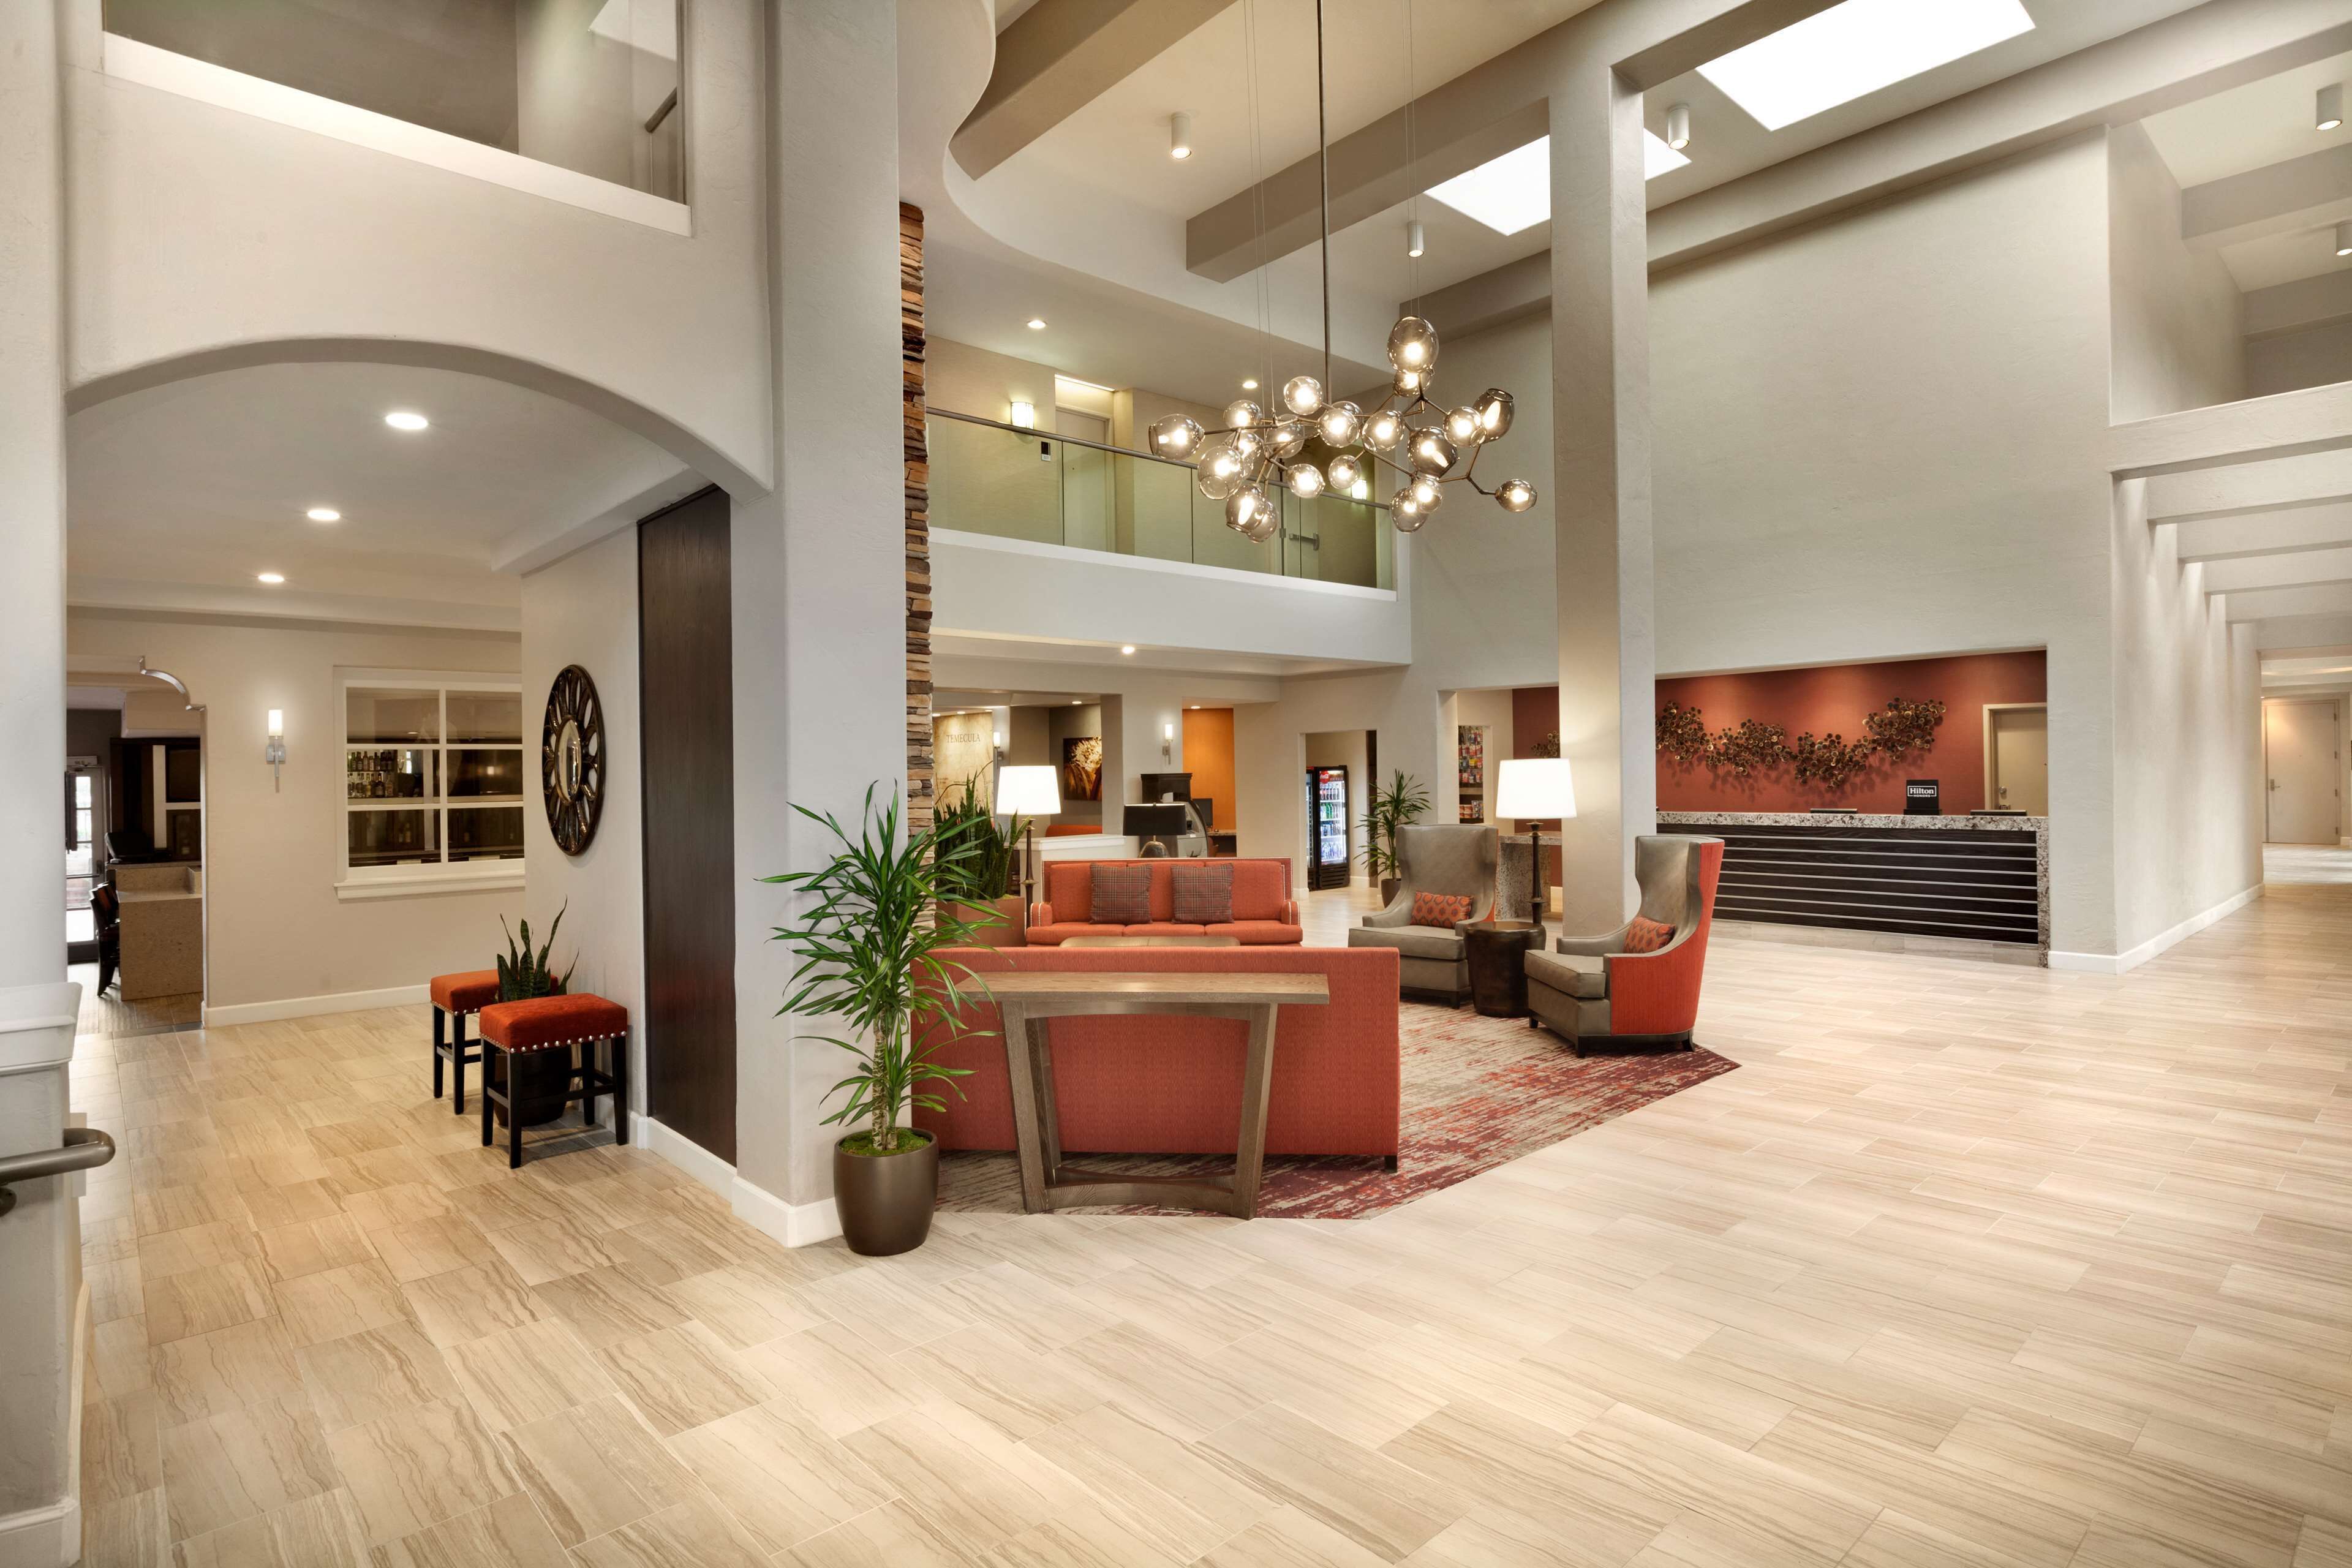 Embassy Suites by Hilton Temecula Valley